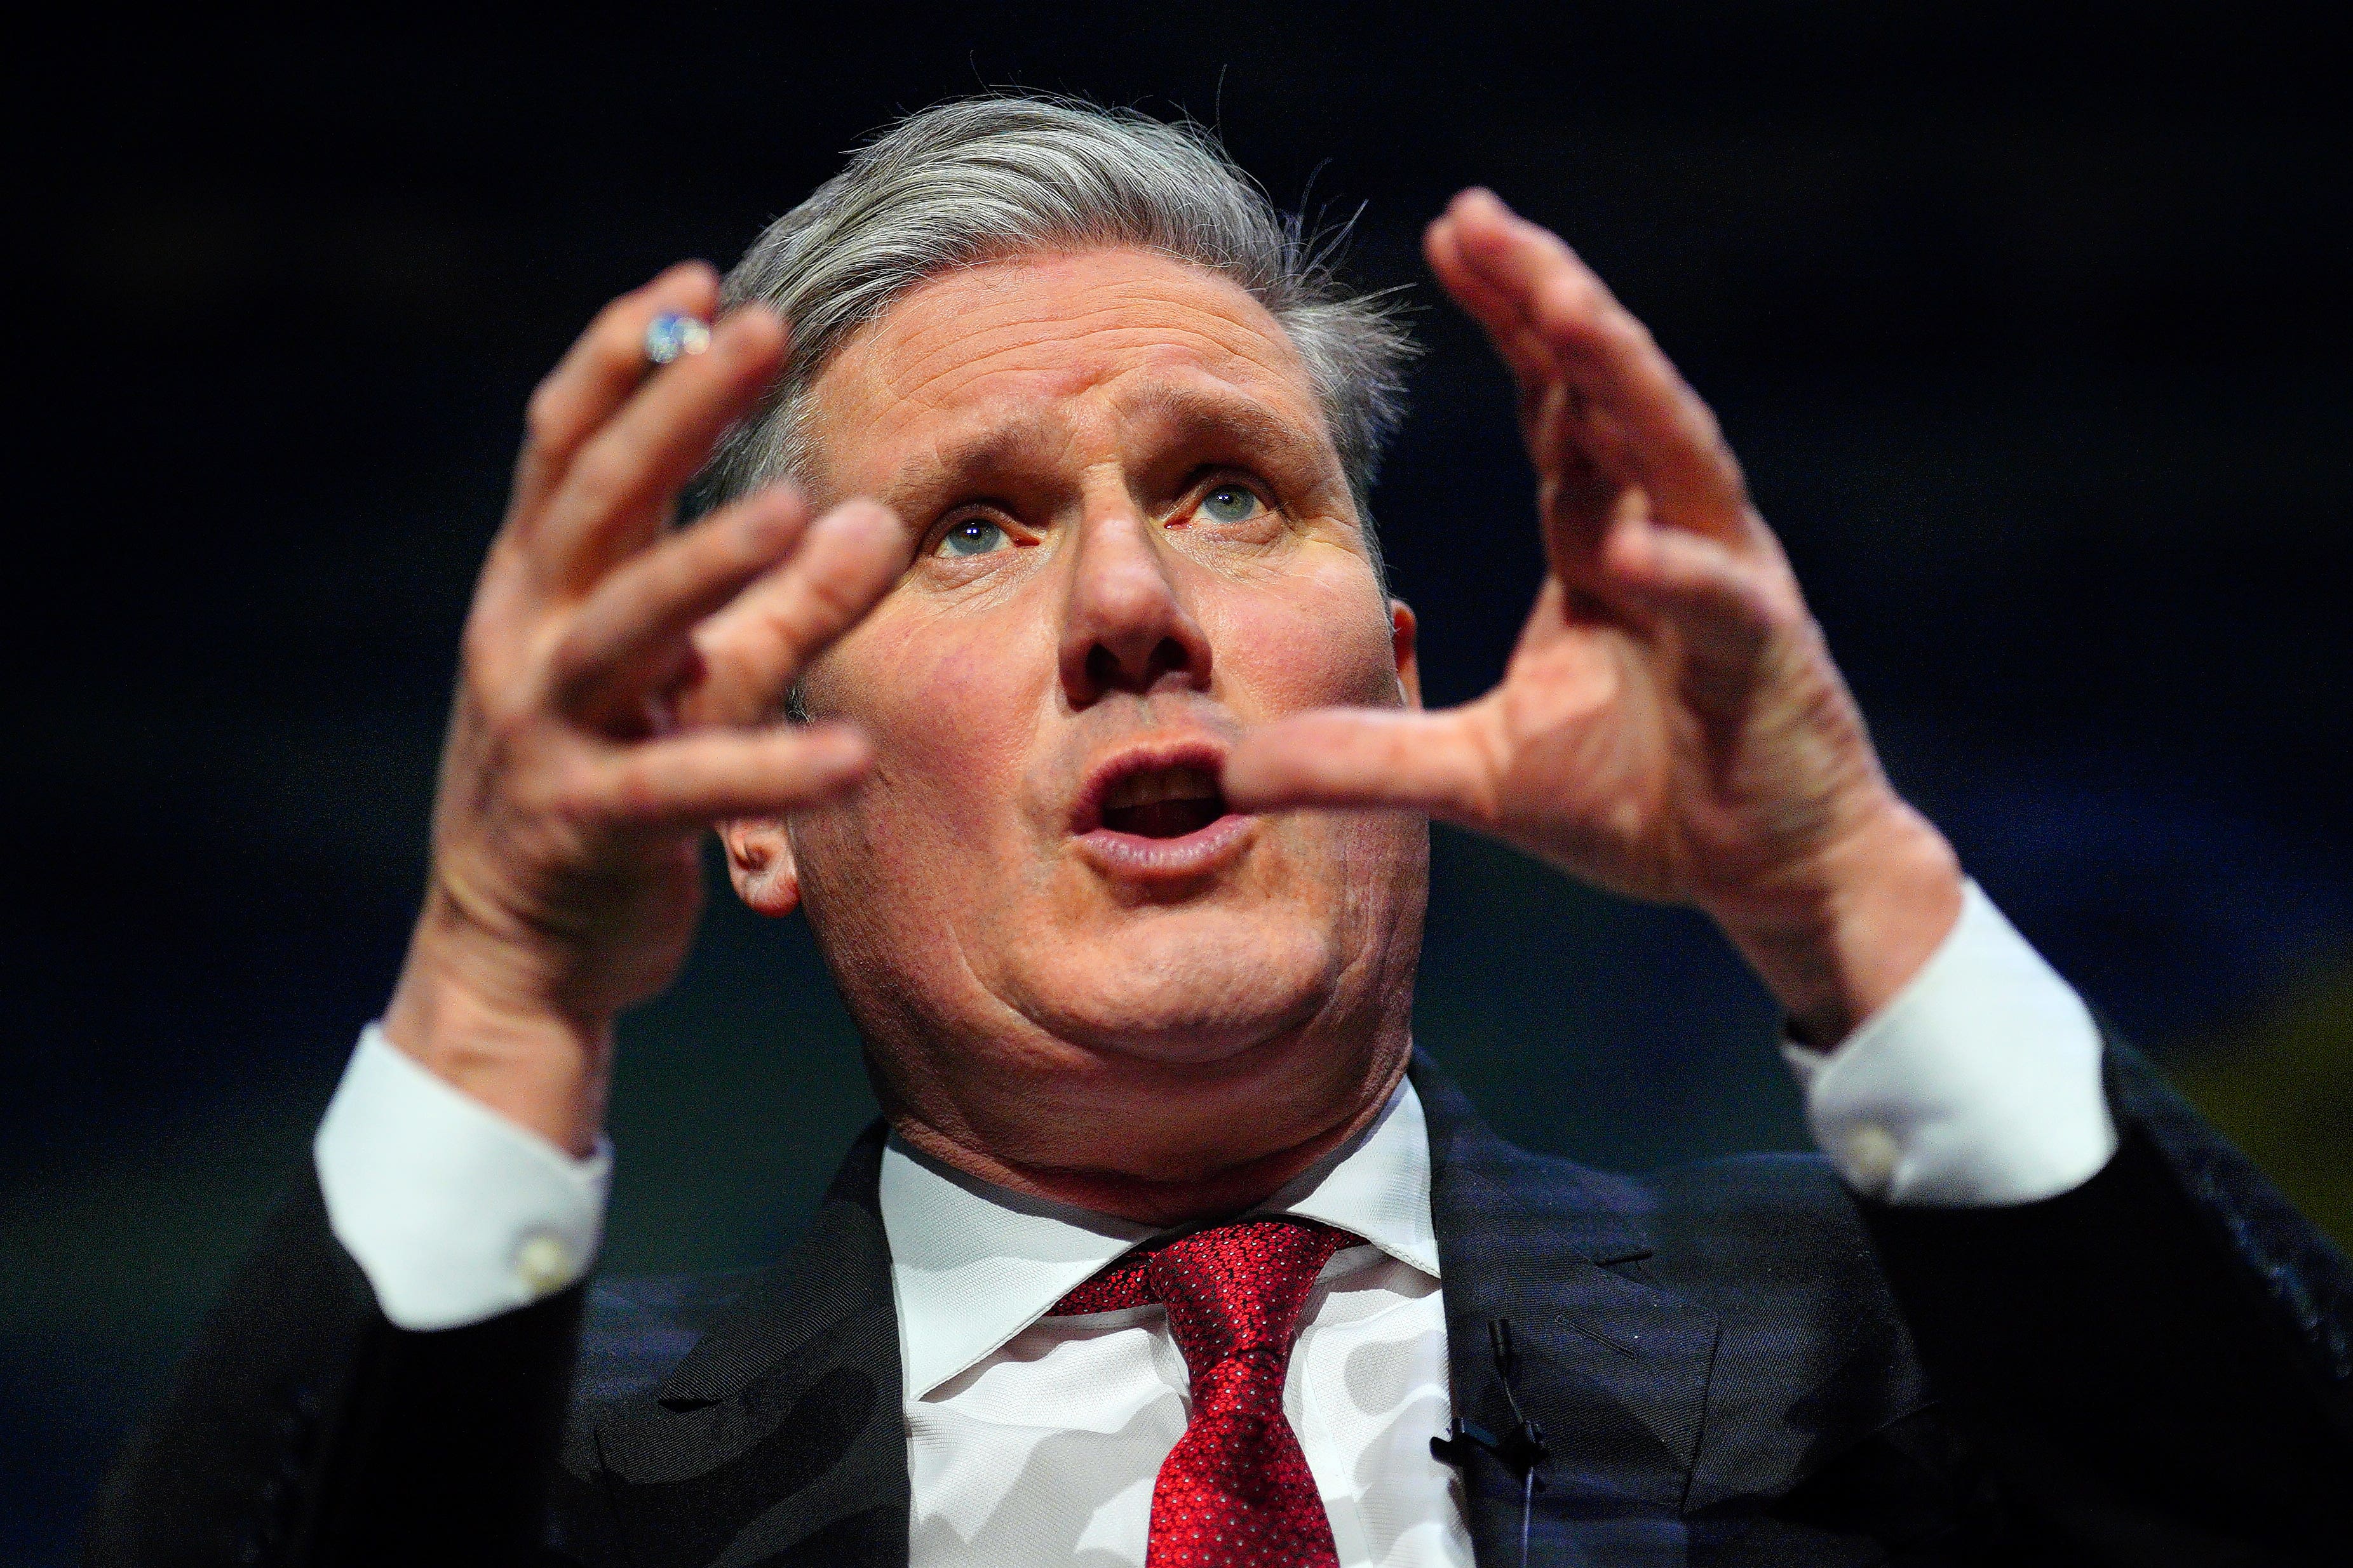 Labour leader Sir Keir Starmer has set out his five missions if he were to become prime minister (Ben Birchall/PA)